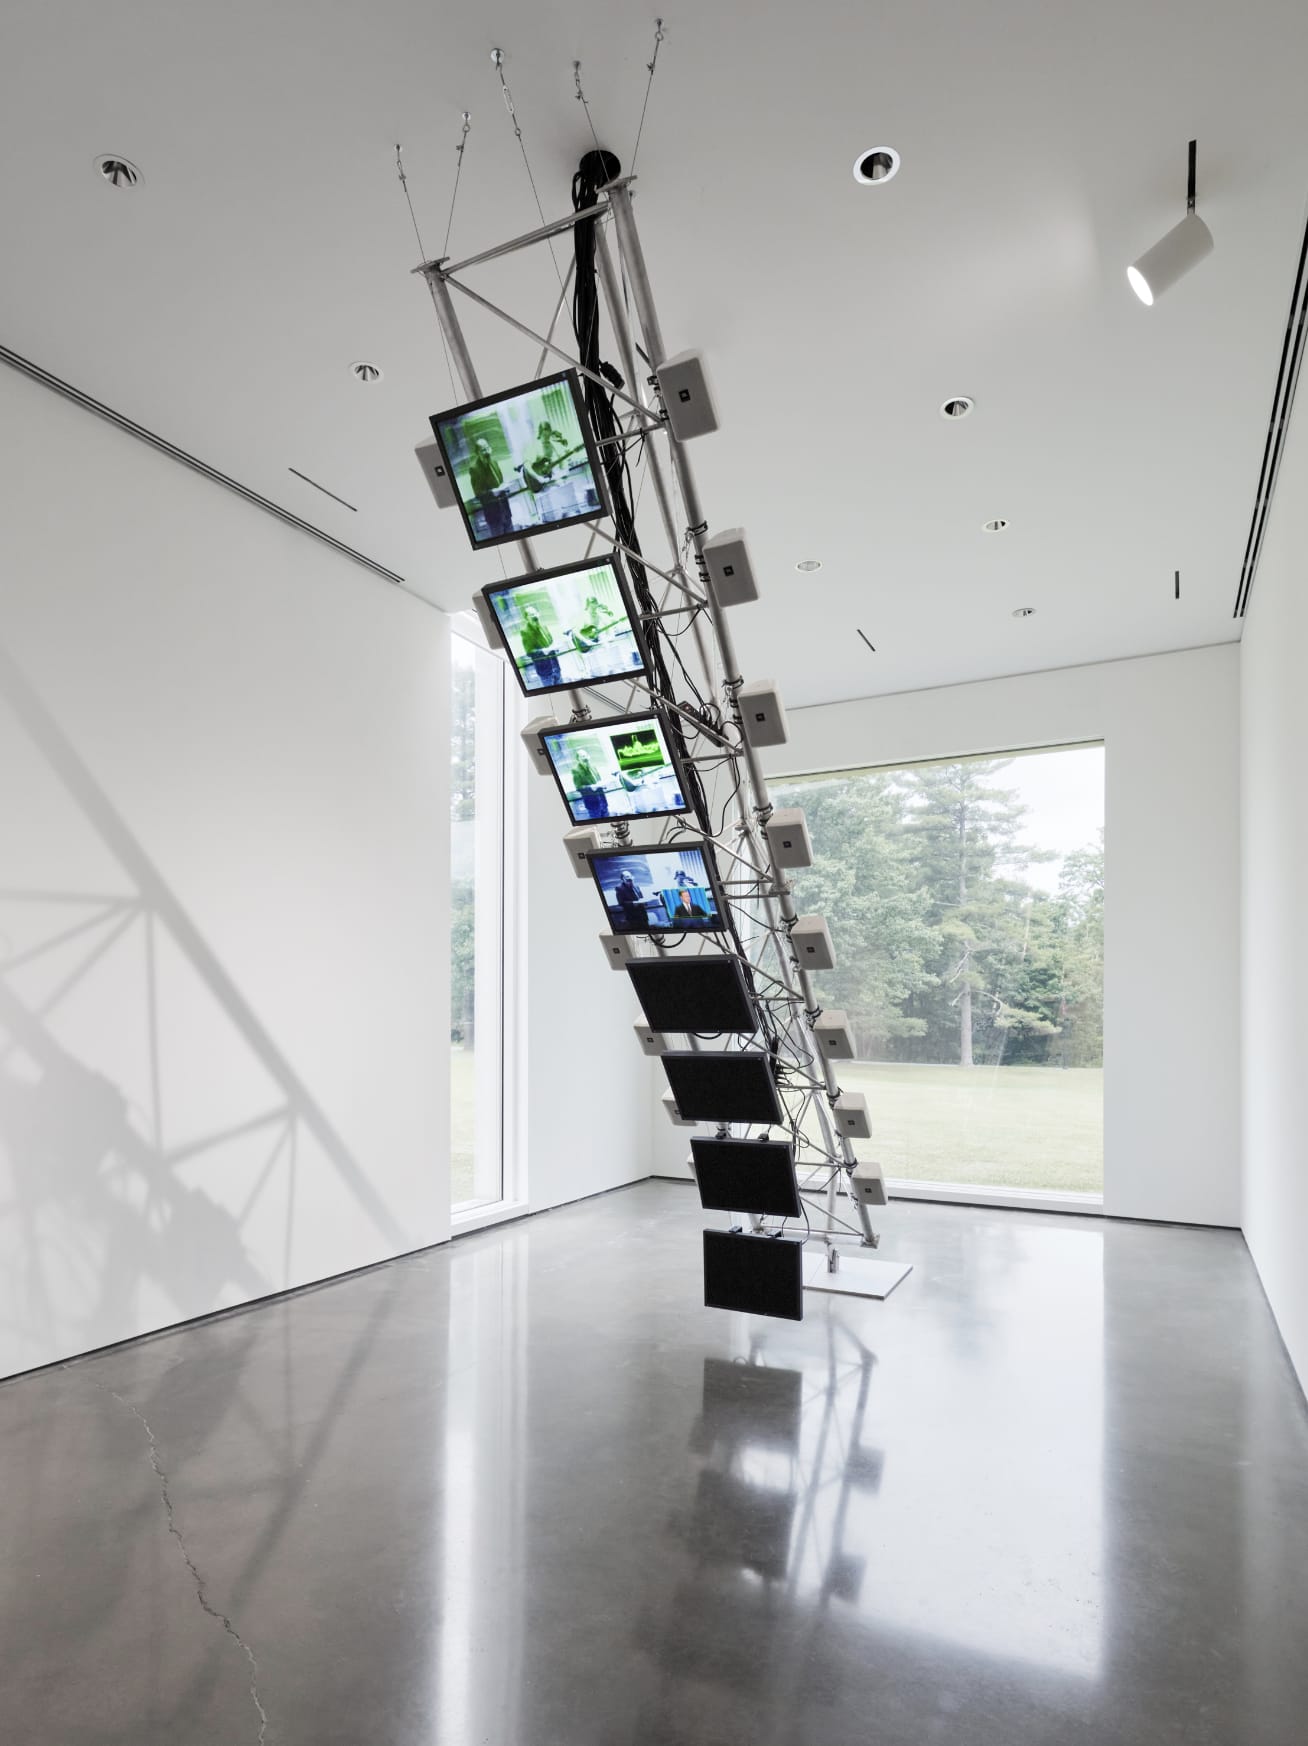 Installation by Dara Birnbaum with many screens in a tower